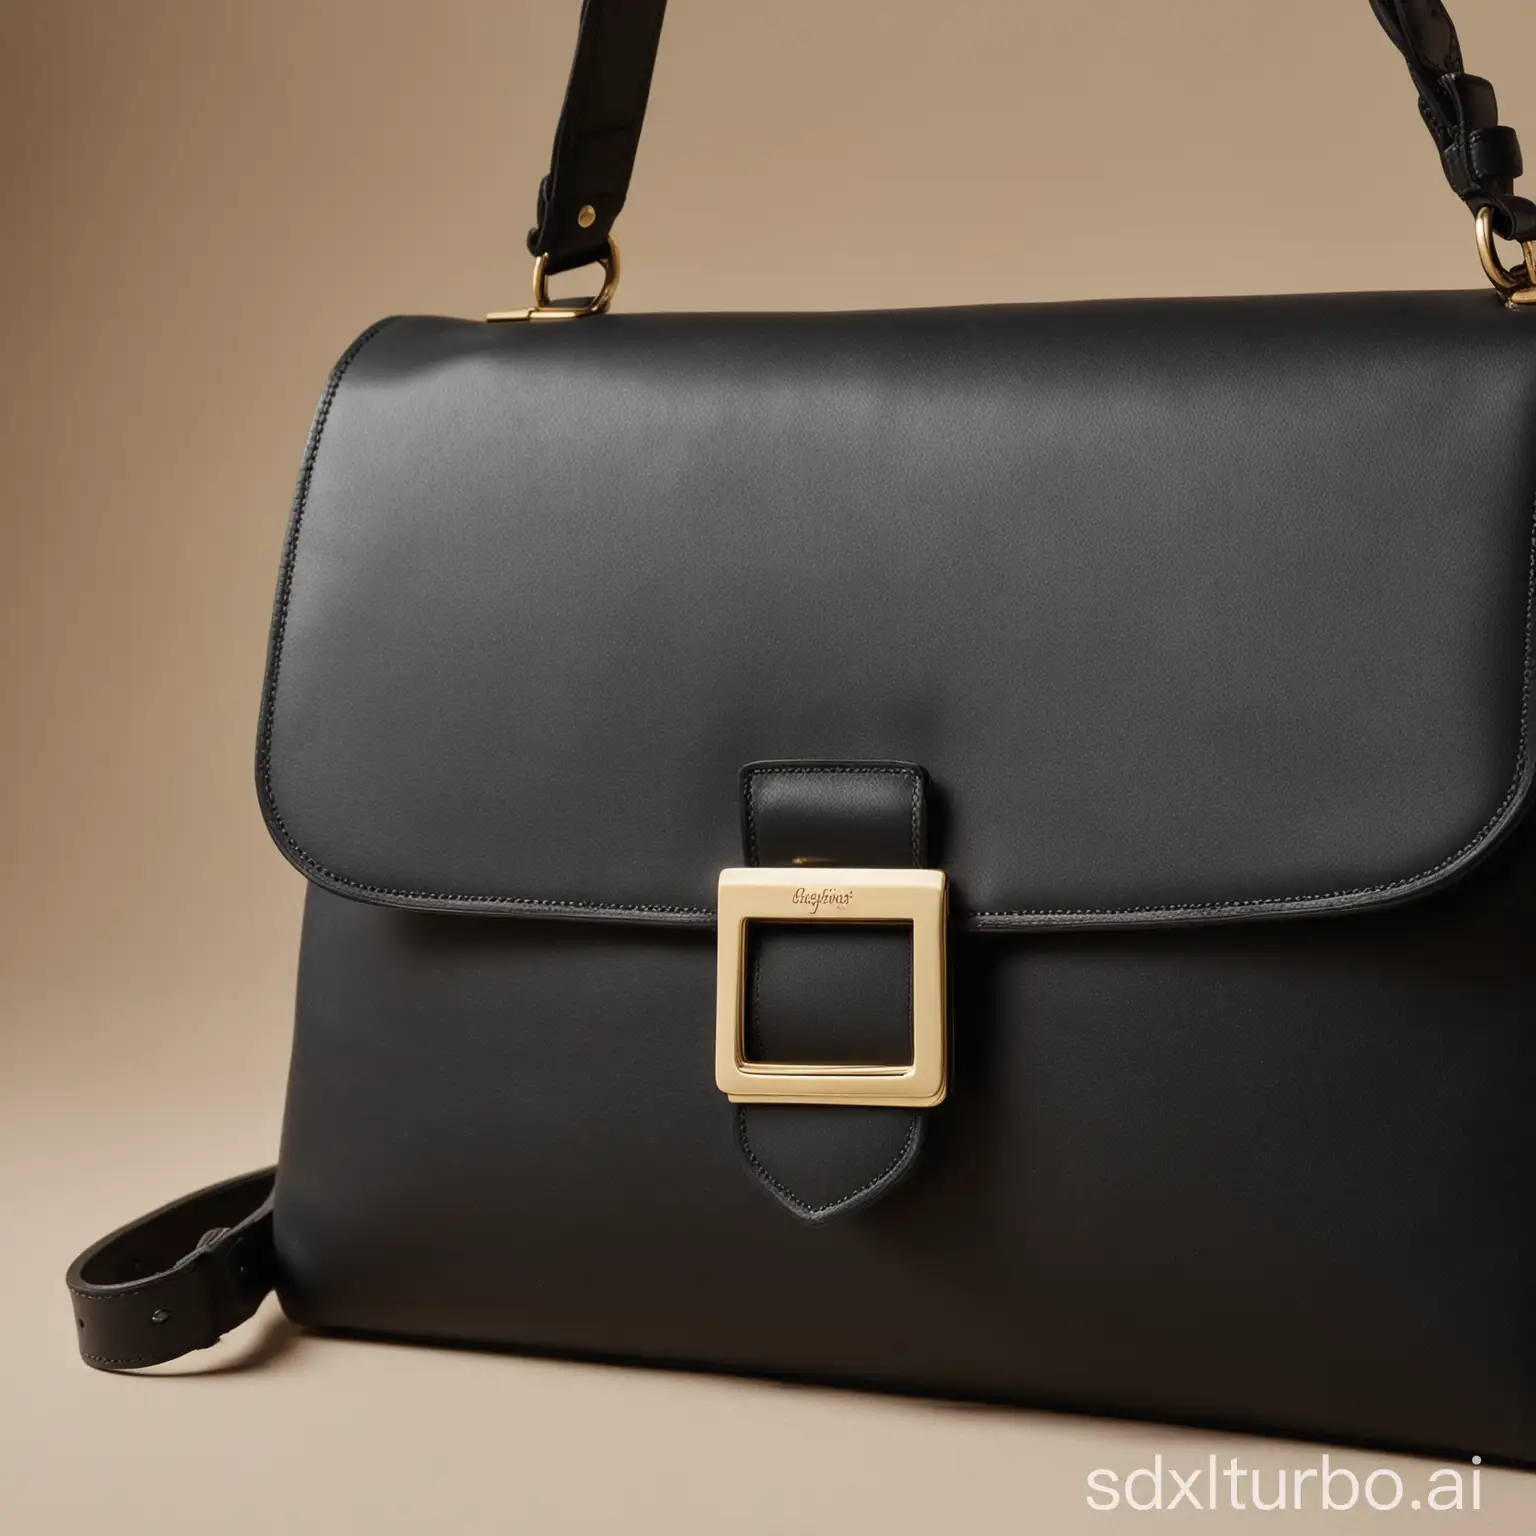 Classic-Black-Leather-Handbag-with-GoldTone-Buckle-on-Neutral-Background